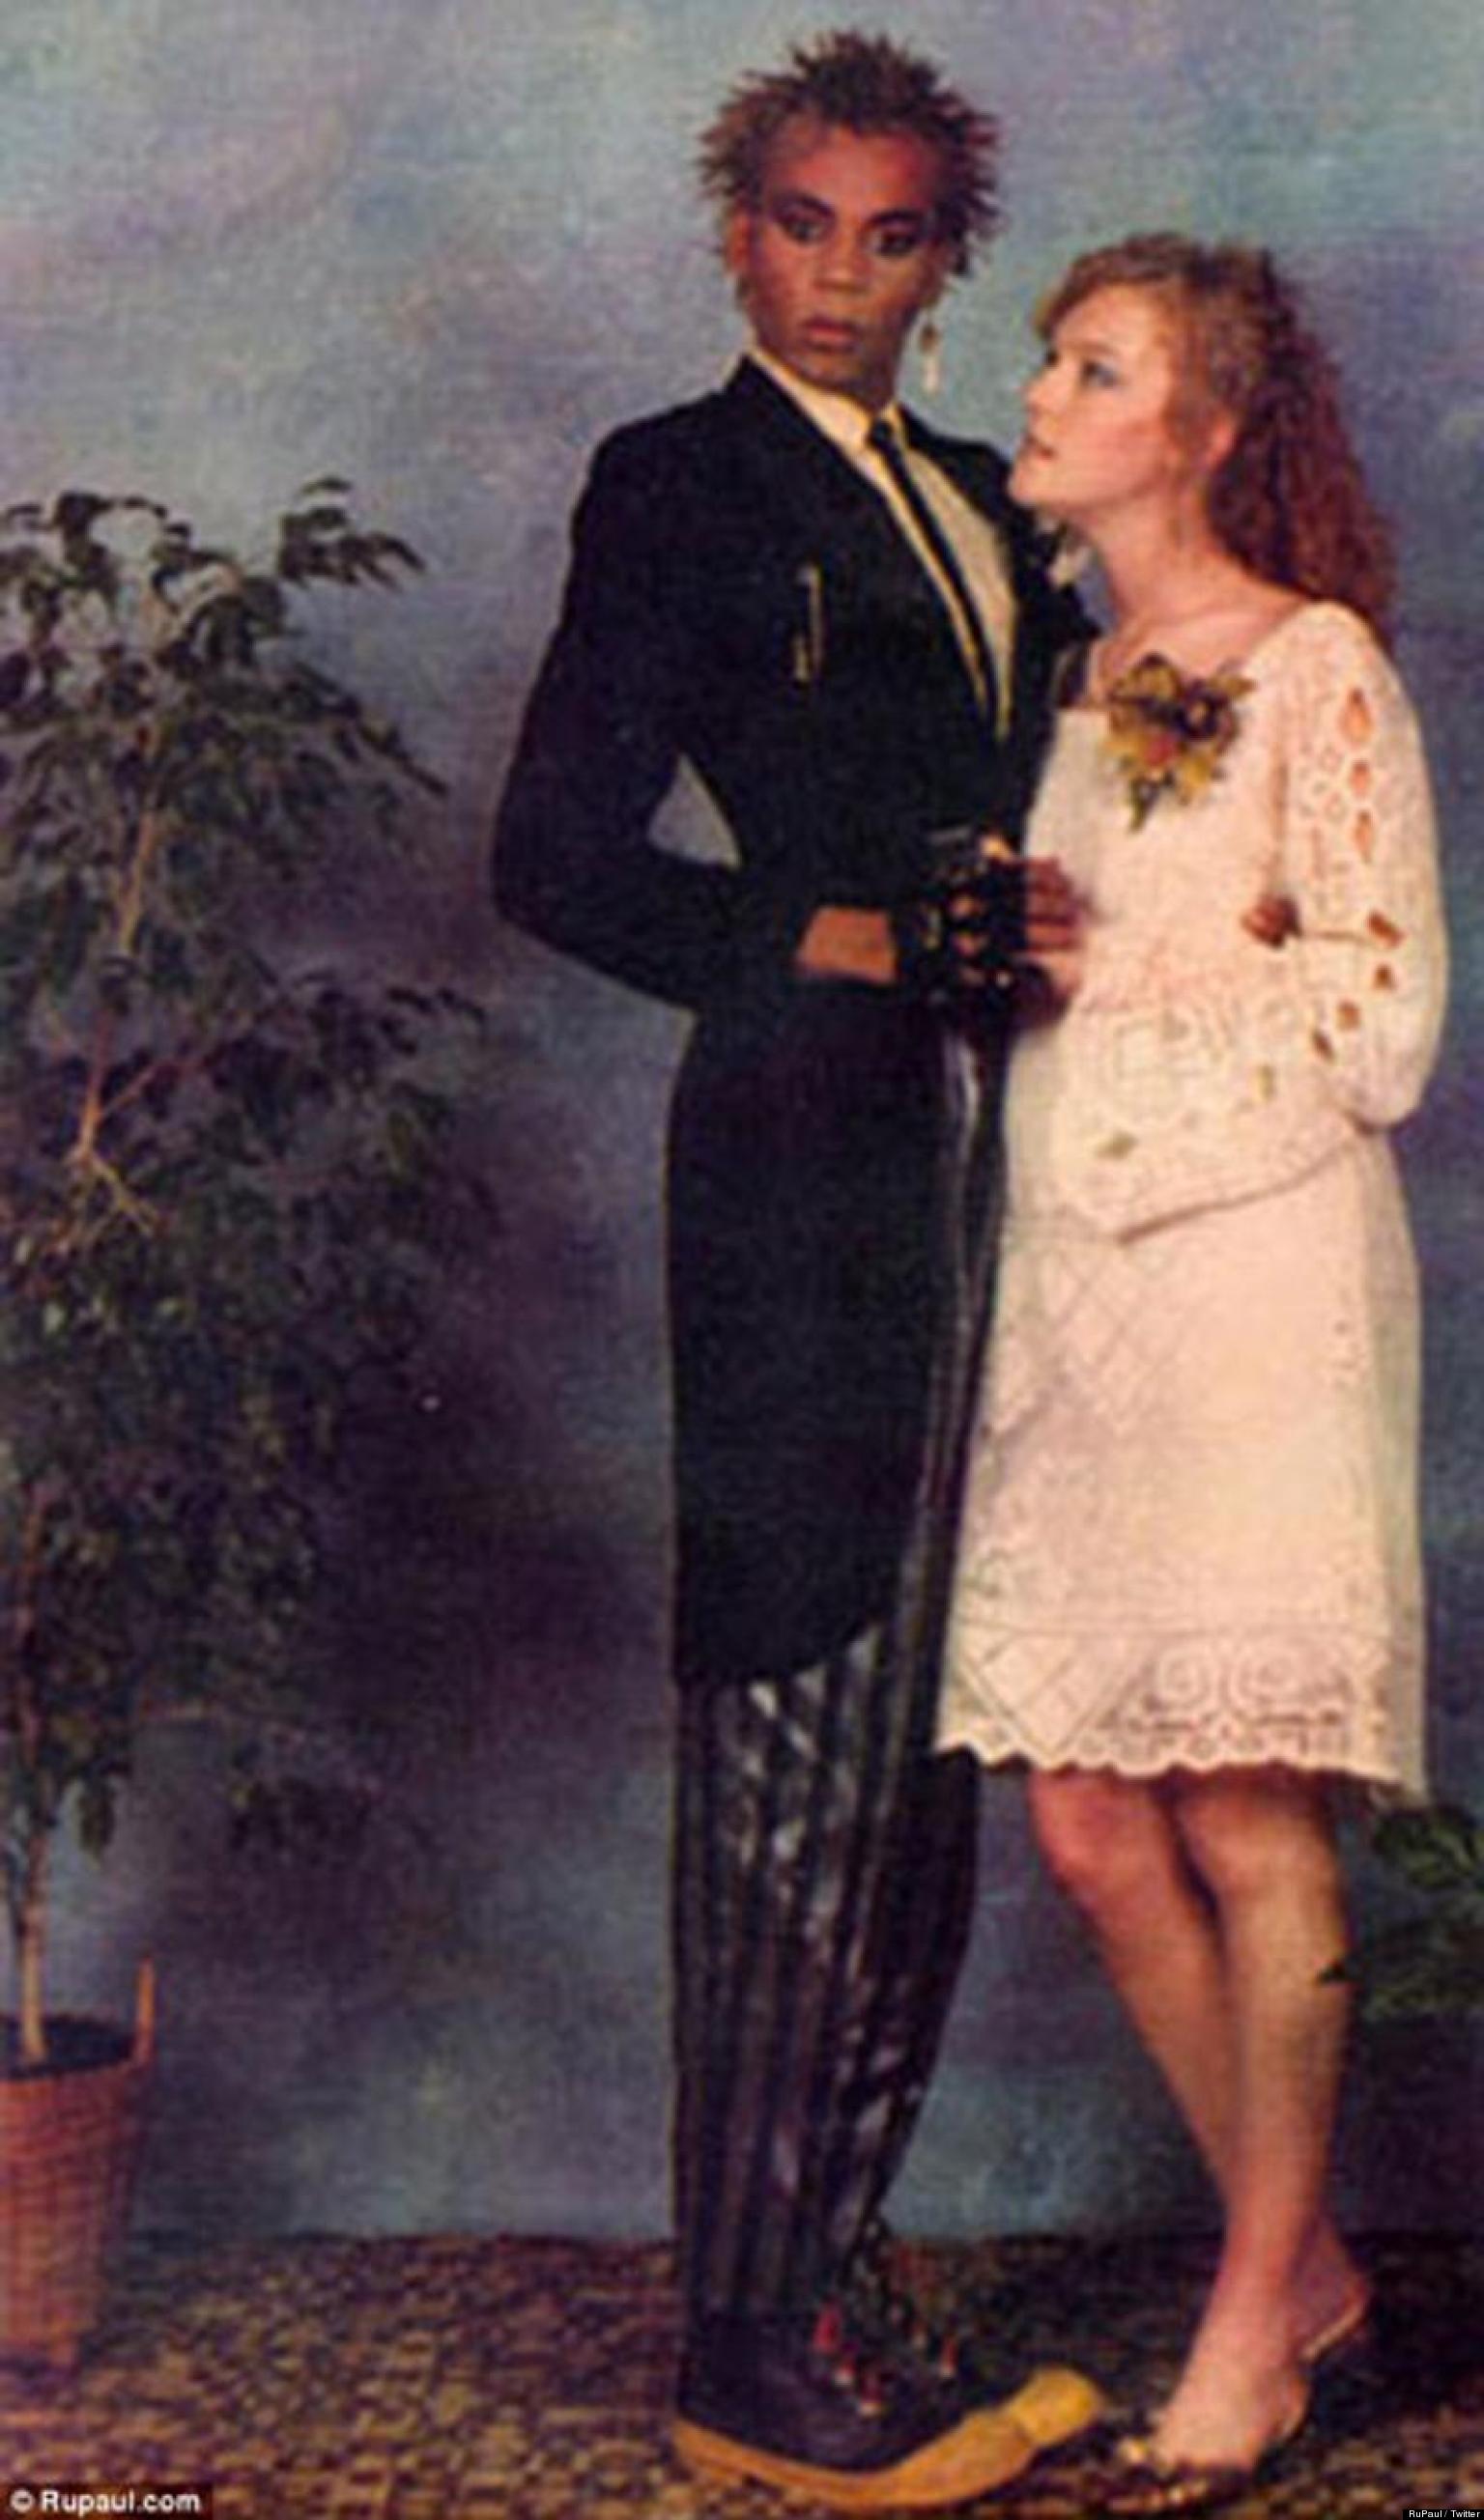 RuPaul's Prom Picture Shows Drag Queen Had It Going On Even In High School | HuffPost